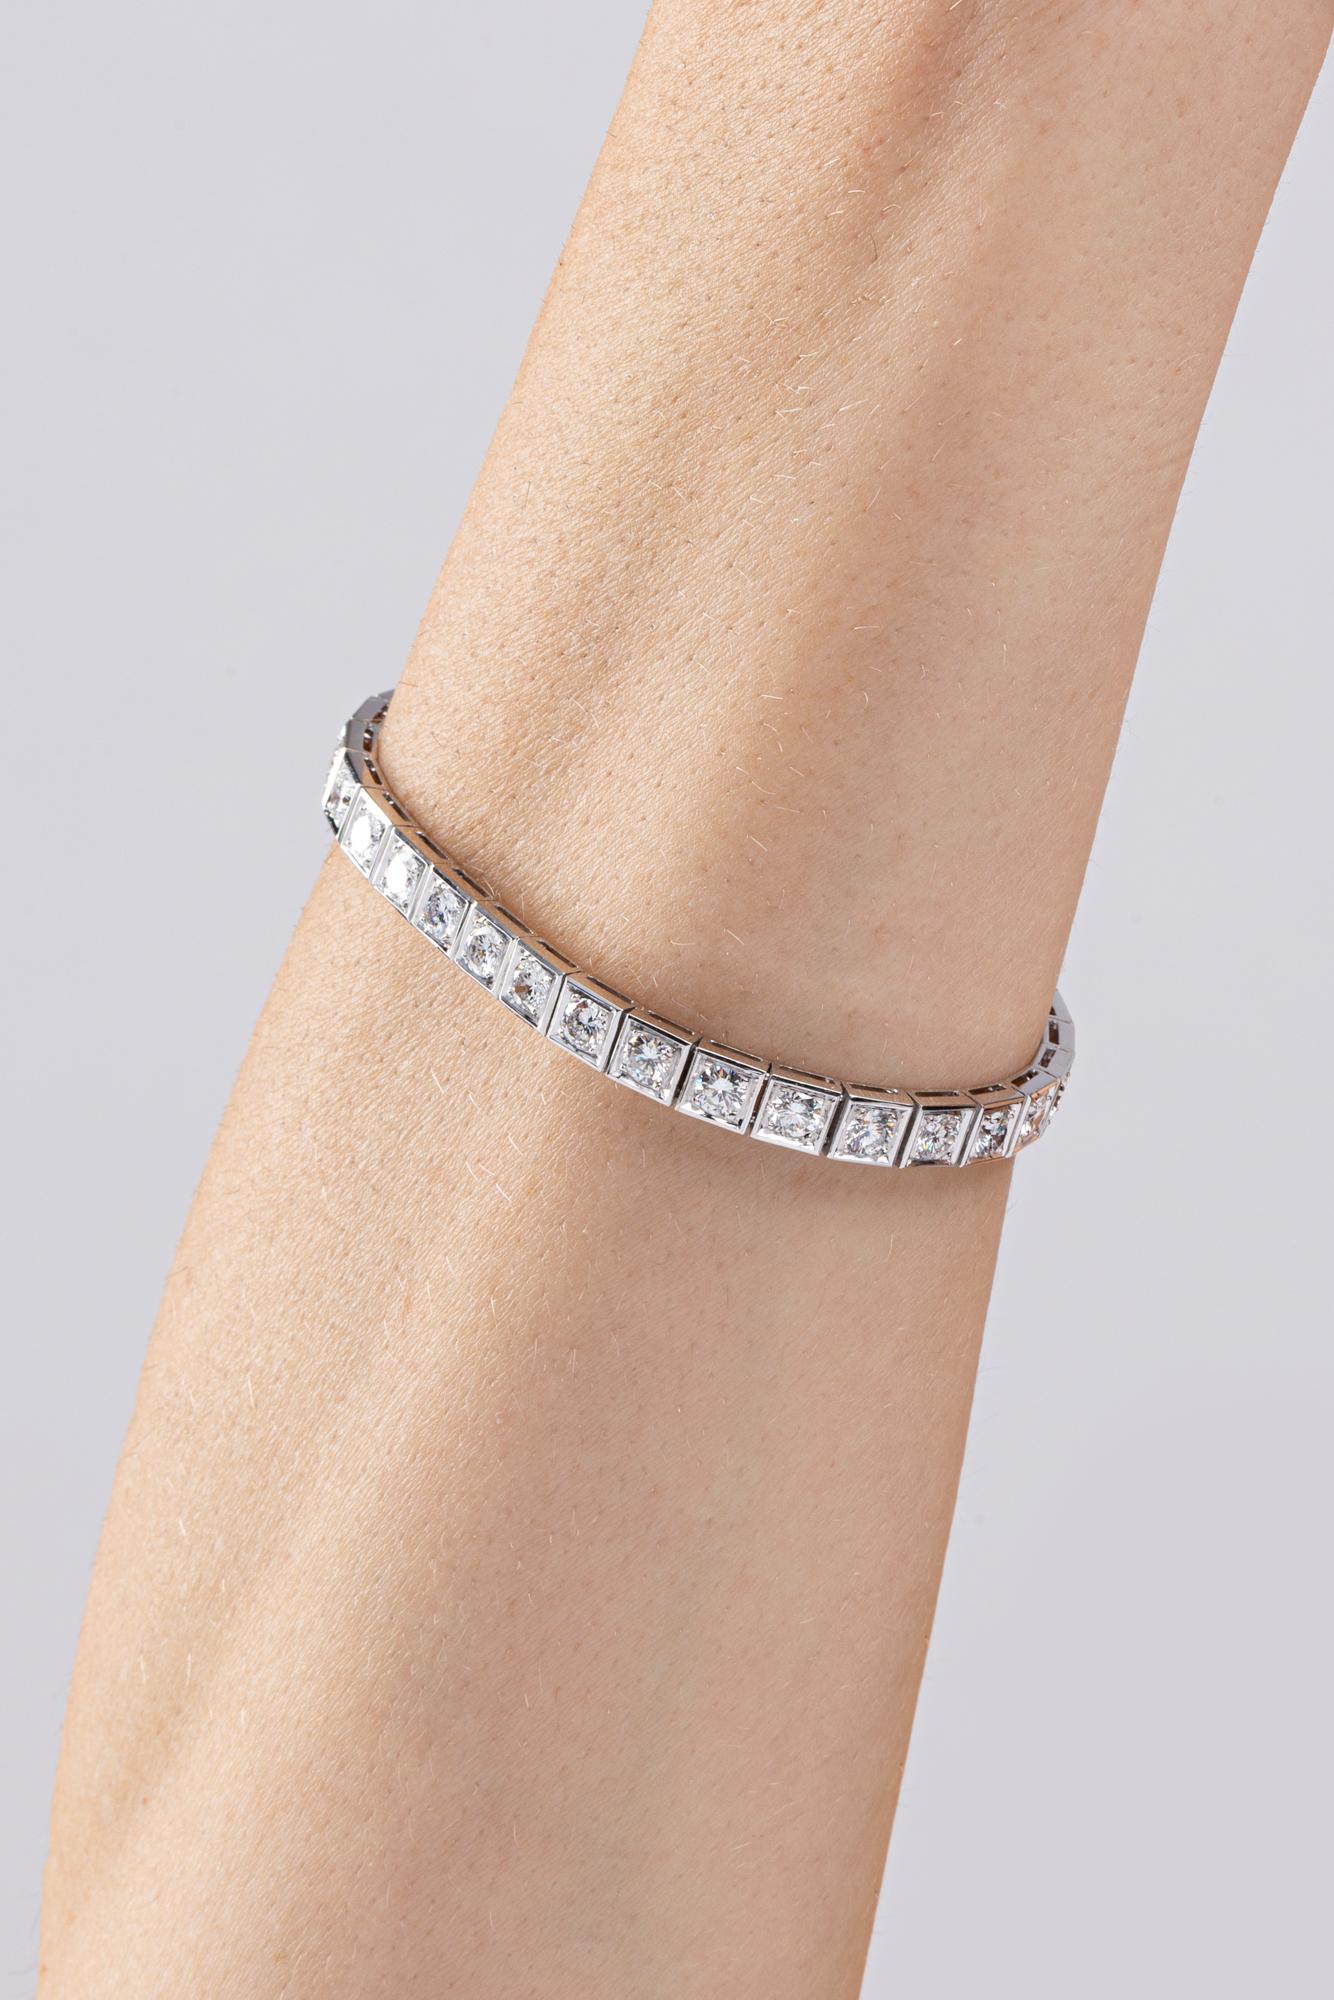 Alex Jona design collection, hand crafted in Italy, platinum tennis bracelet 7 in. long, set with 31  white diamonds, F color, VVS1 clarity, weighing 0.18 carats each, for a total weight of 5.60. 

Alex Jona jewels stand out, not only for their